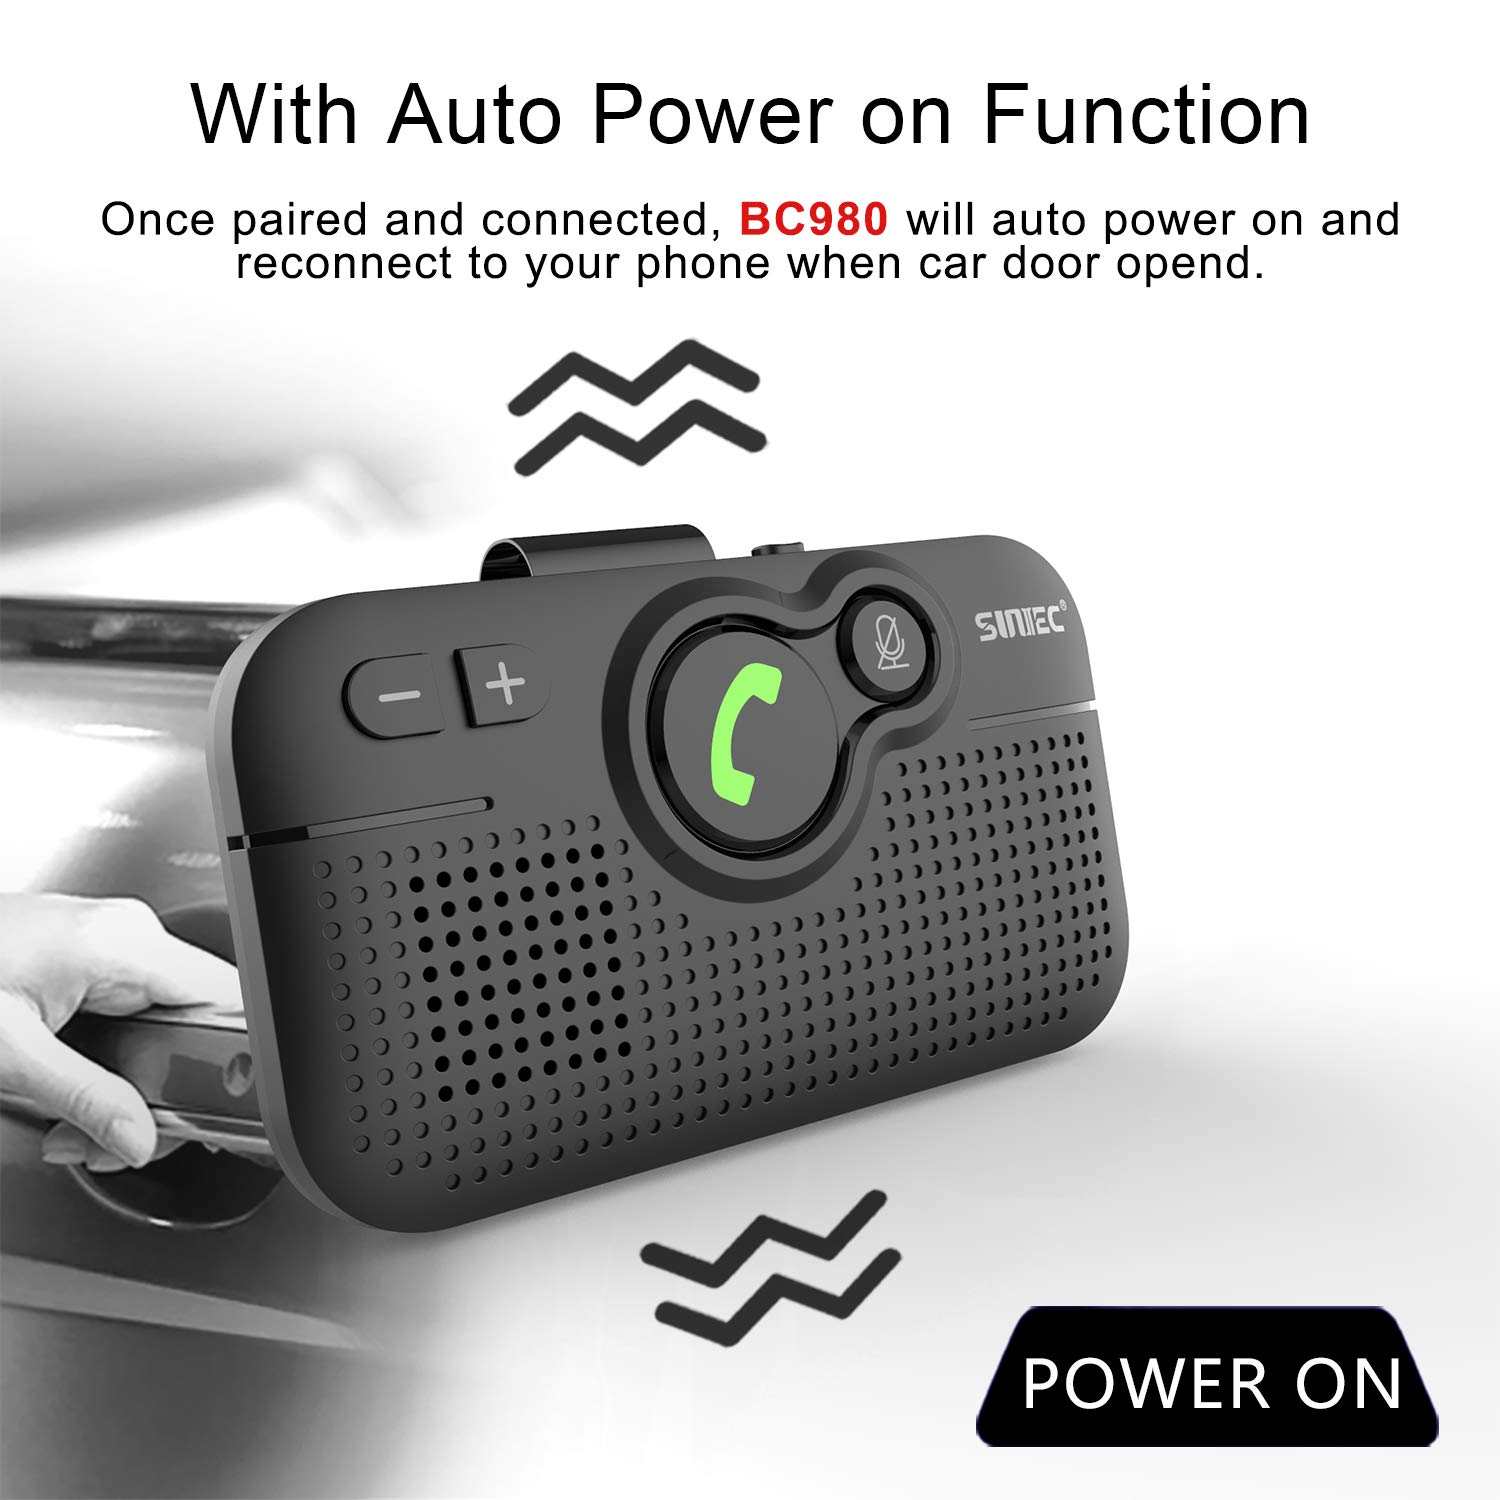 SUNITEC Car Bluetotoh Speaker for Phone: BC980P Multipoint Hands Free in car Speakerphone Kits for Safe Driving - with 2pcs Type-C Fast Charging Data Cable